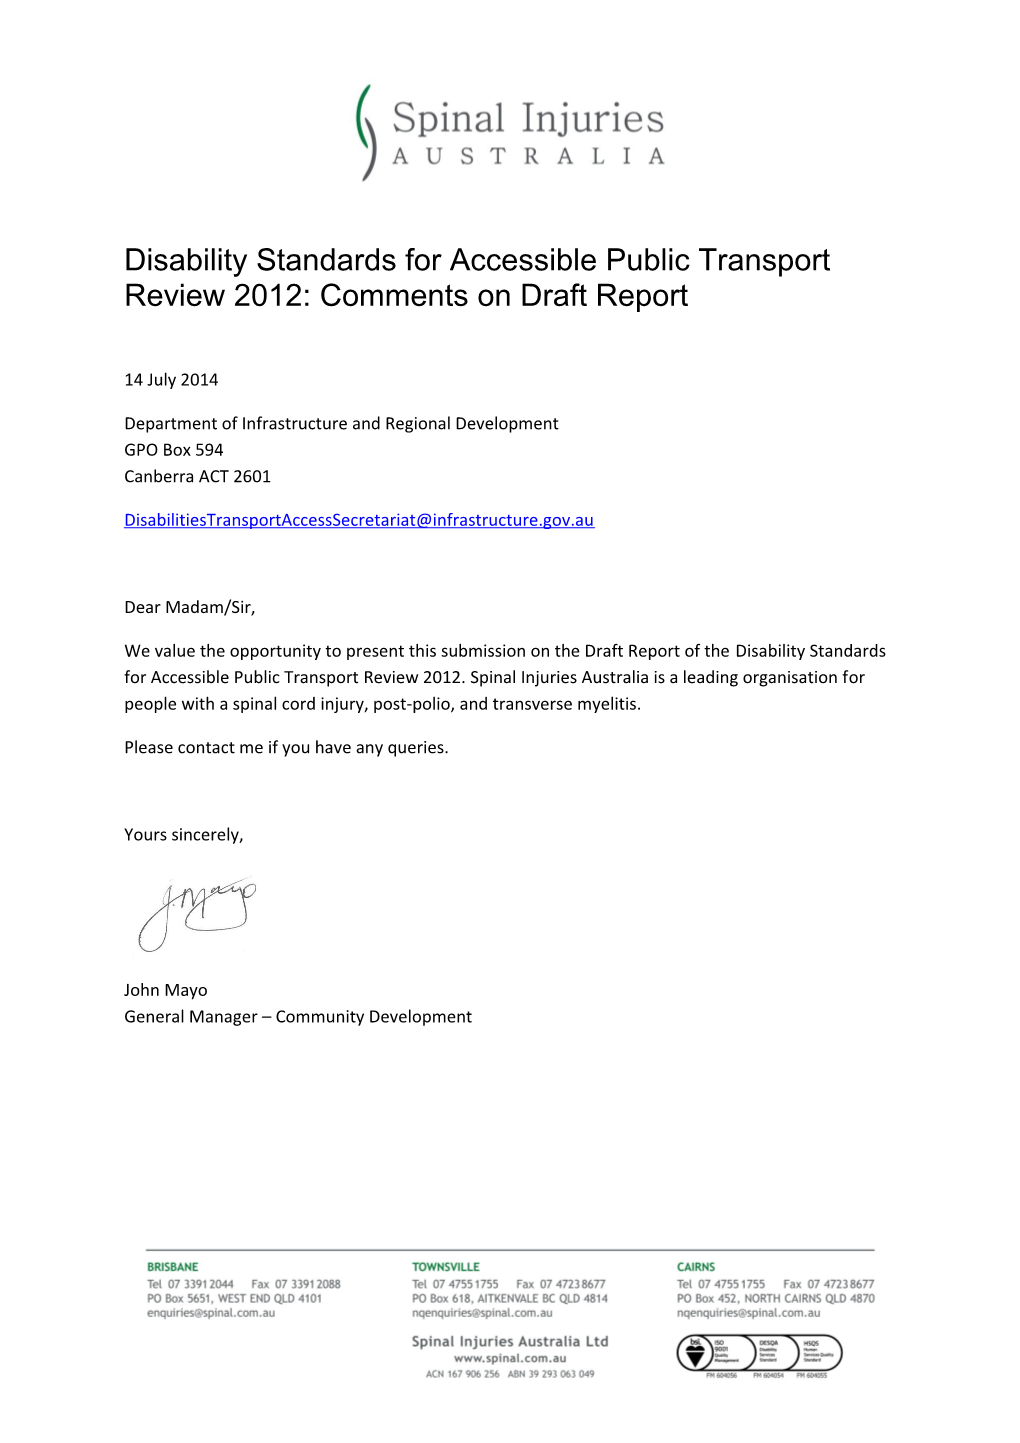 Disability Standards for Accessible Public Transport Review 2012: Comments on Draft Report